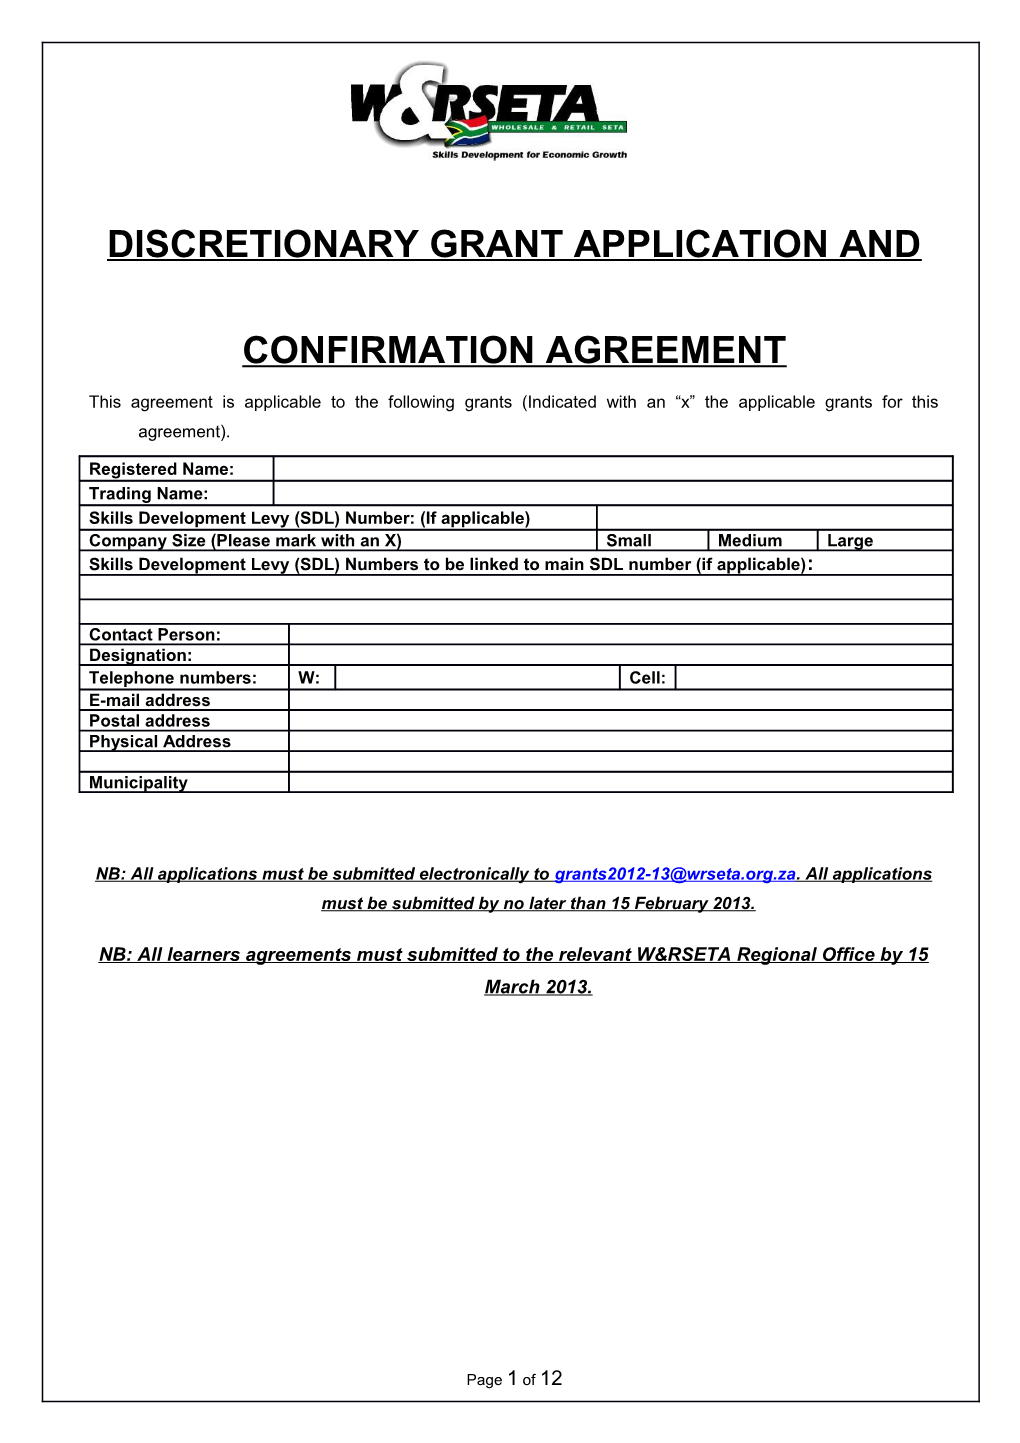 Discretionary Grant Application And